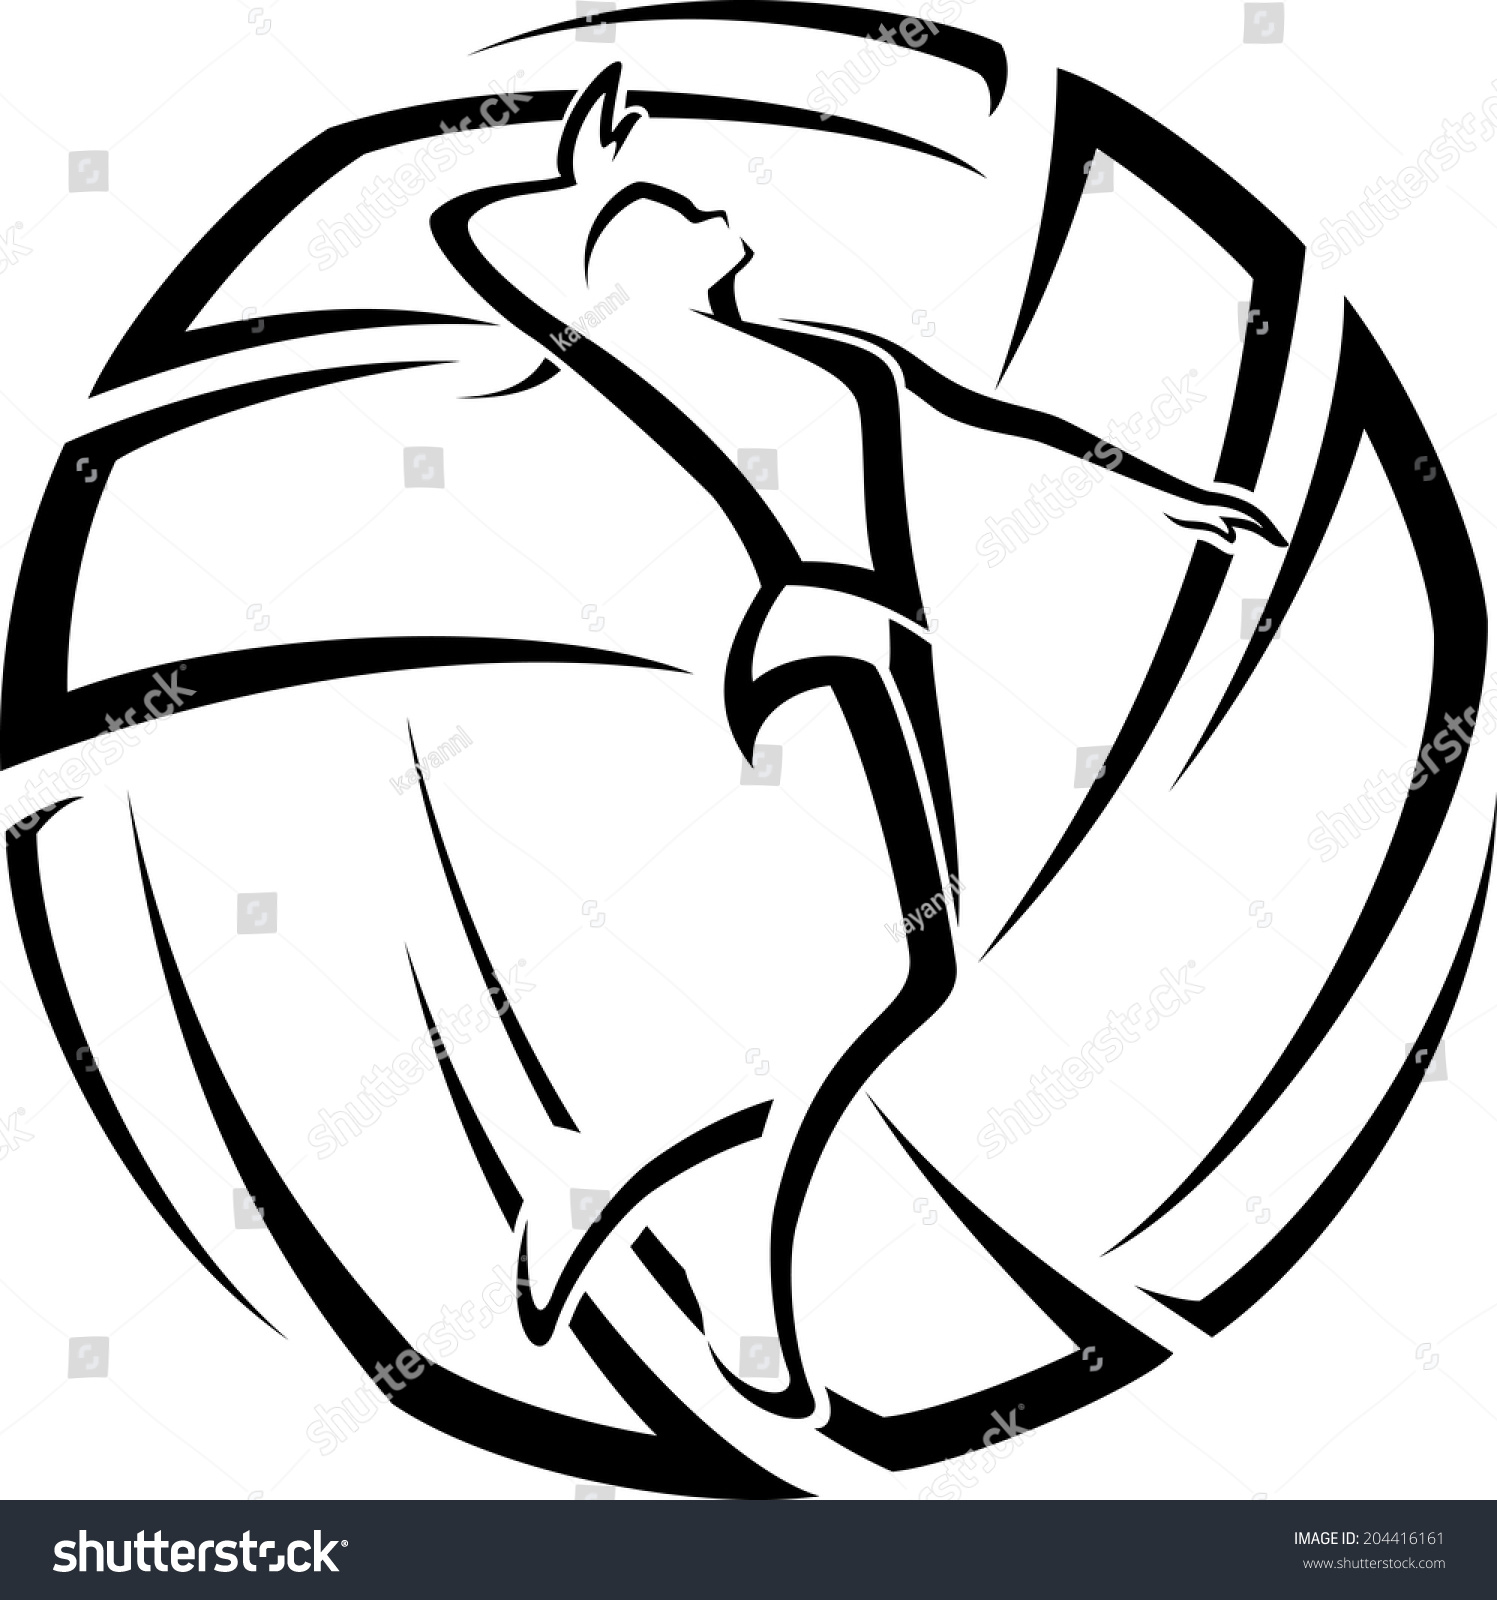 volleyball symbol clipart - photo #42